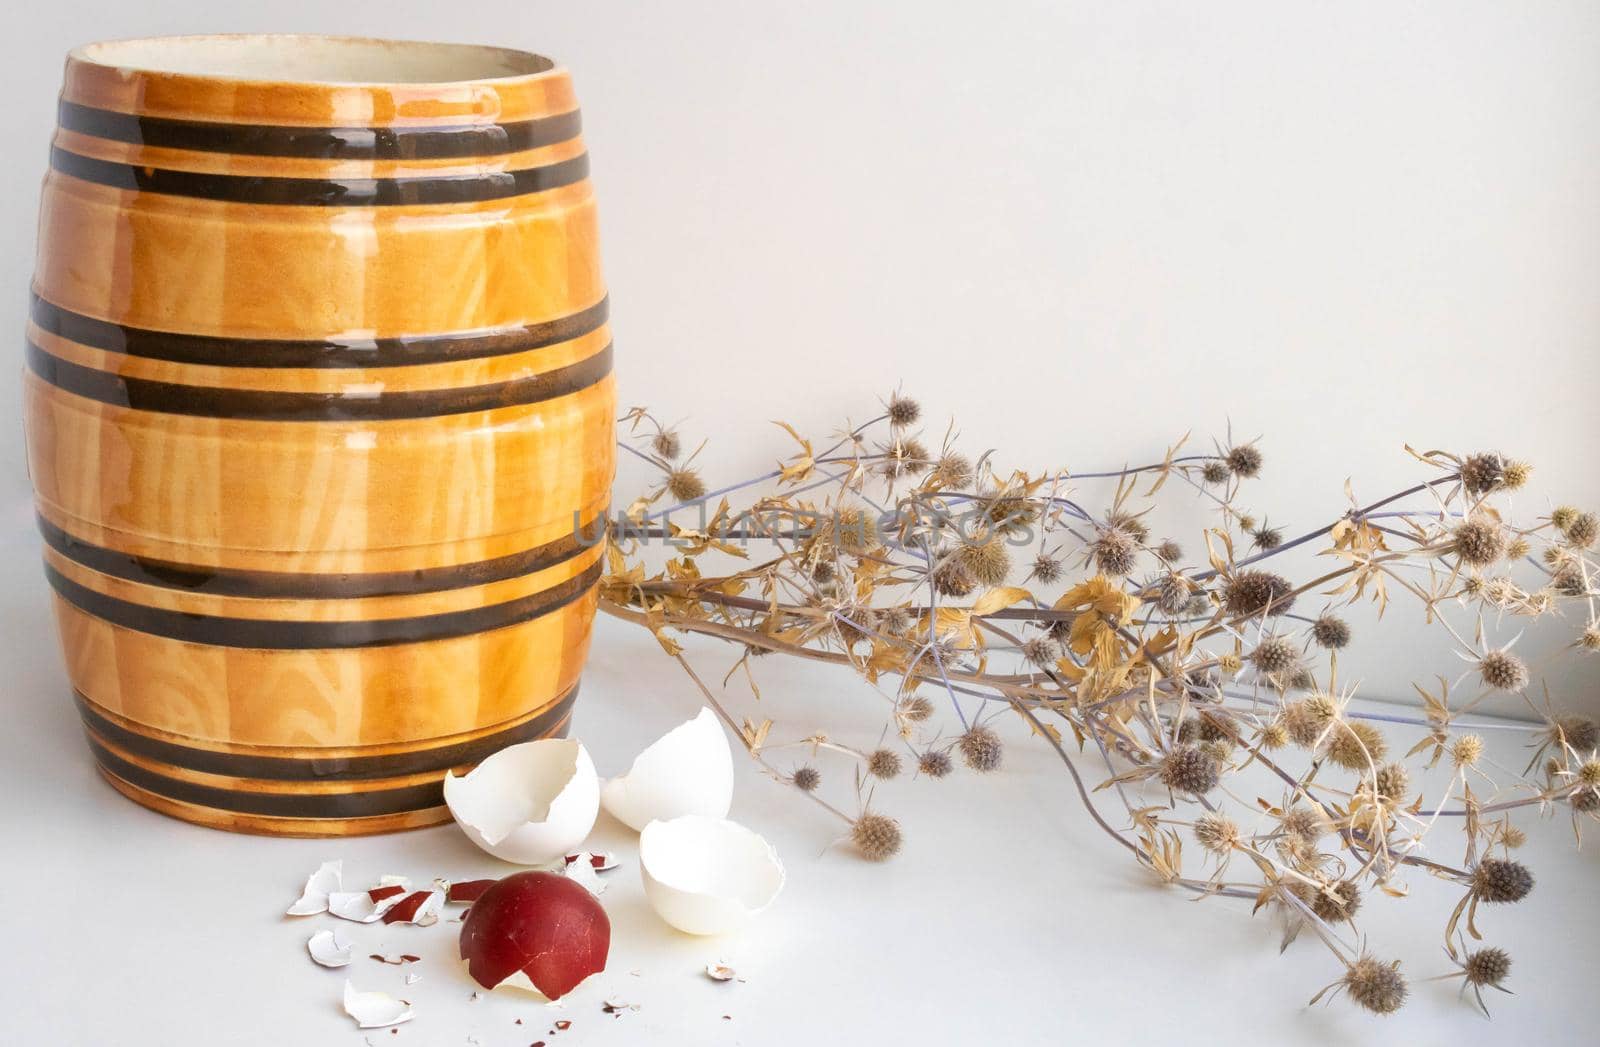 Easter. Still life with eggshells, clay barrel and dried flowers on a white background.